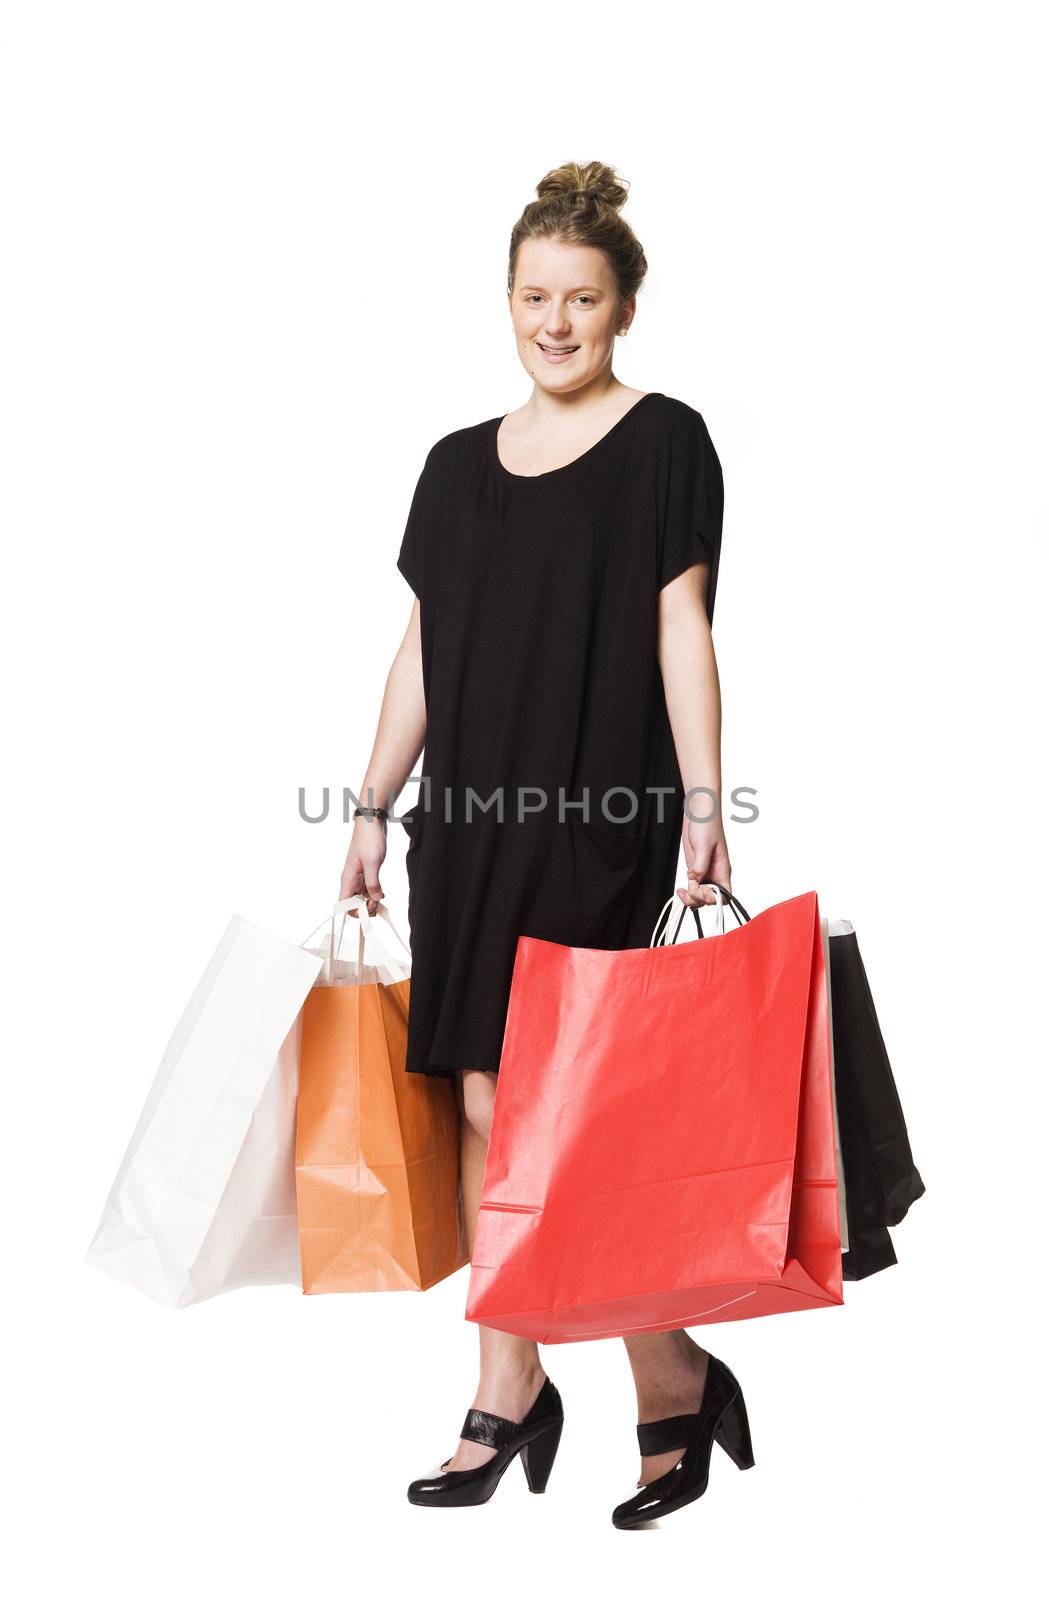 Girl with shoppingbags by gemenacom